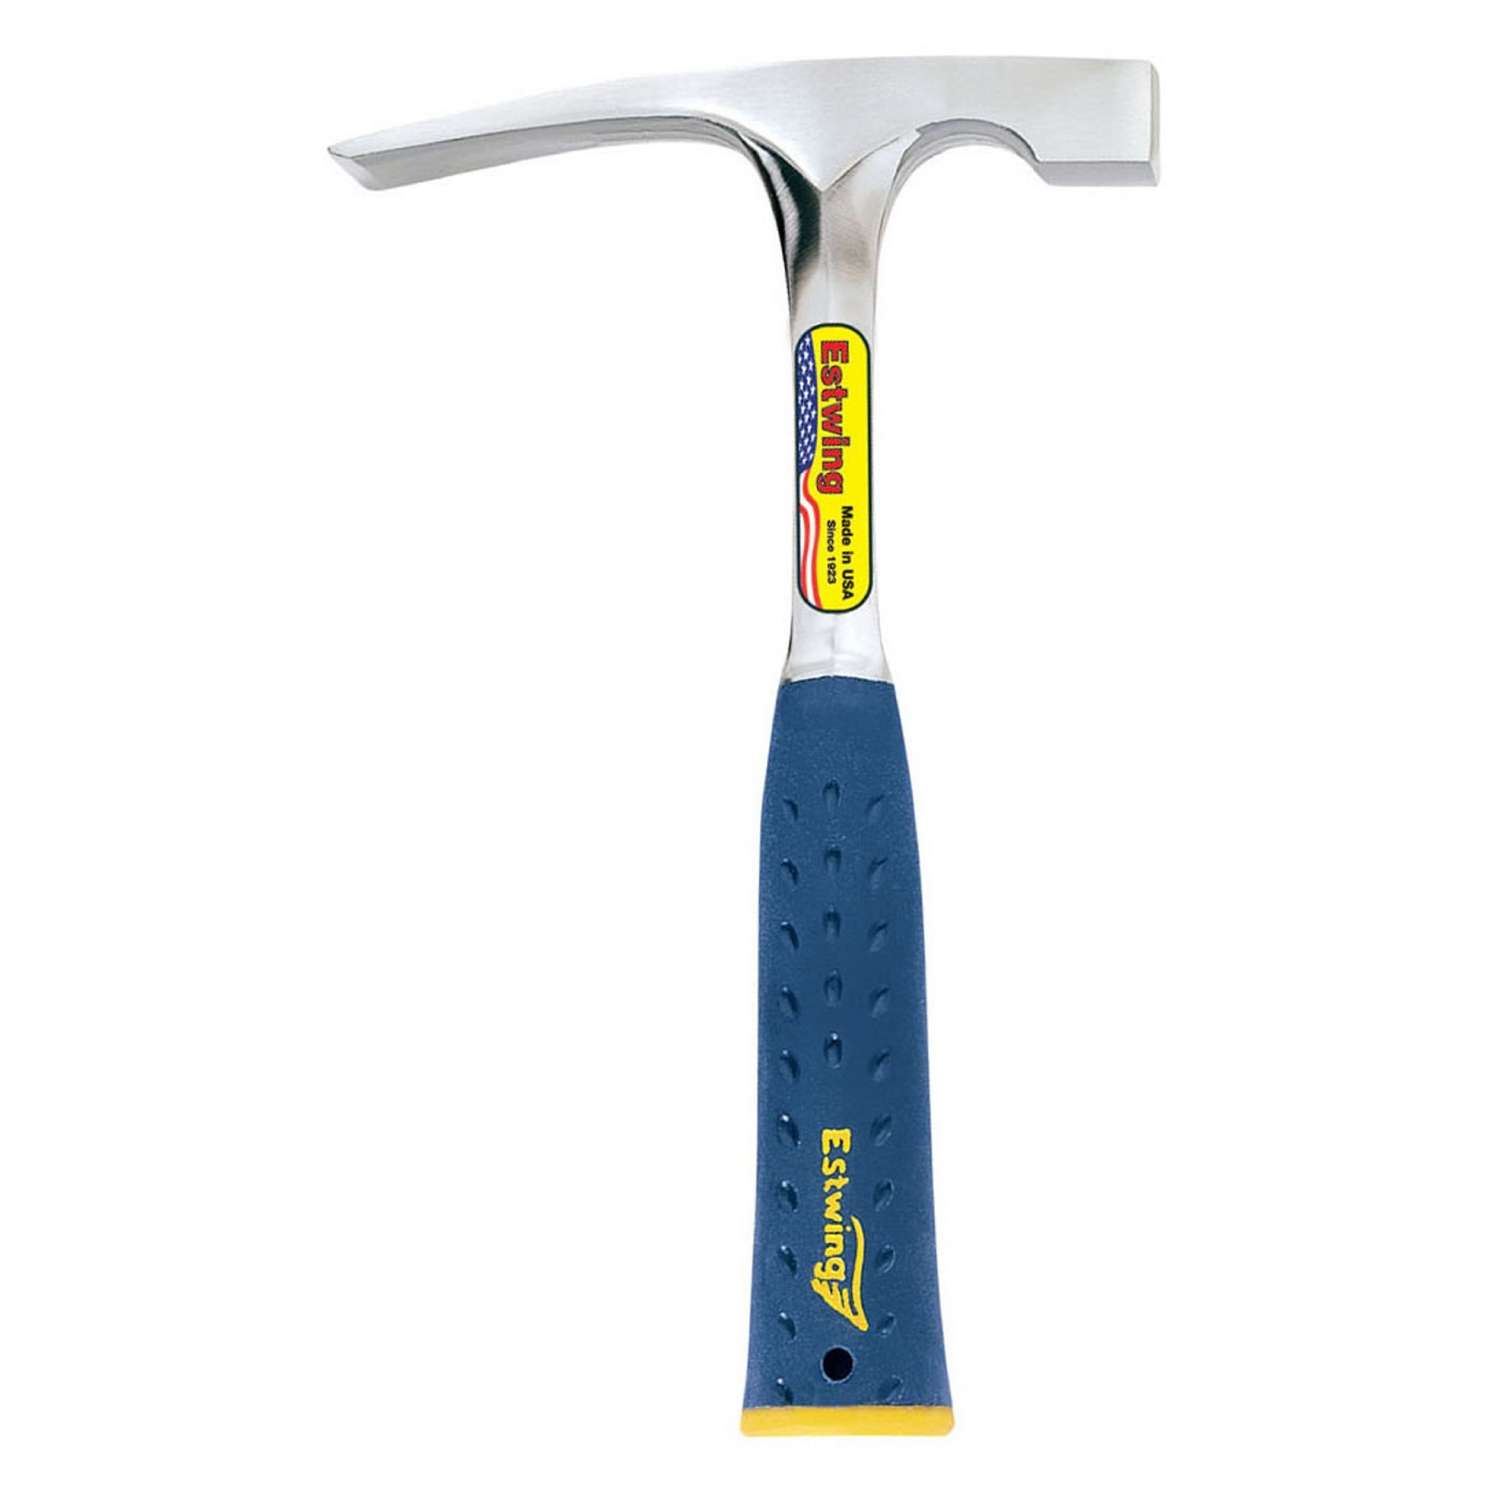 Estwing 20-ounce Bricklayer's Hammer - 9003200